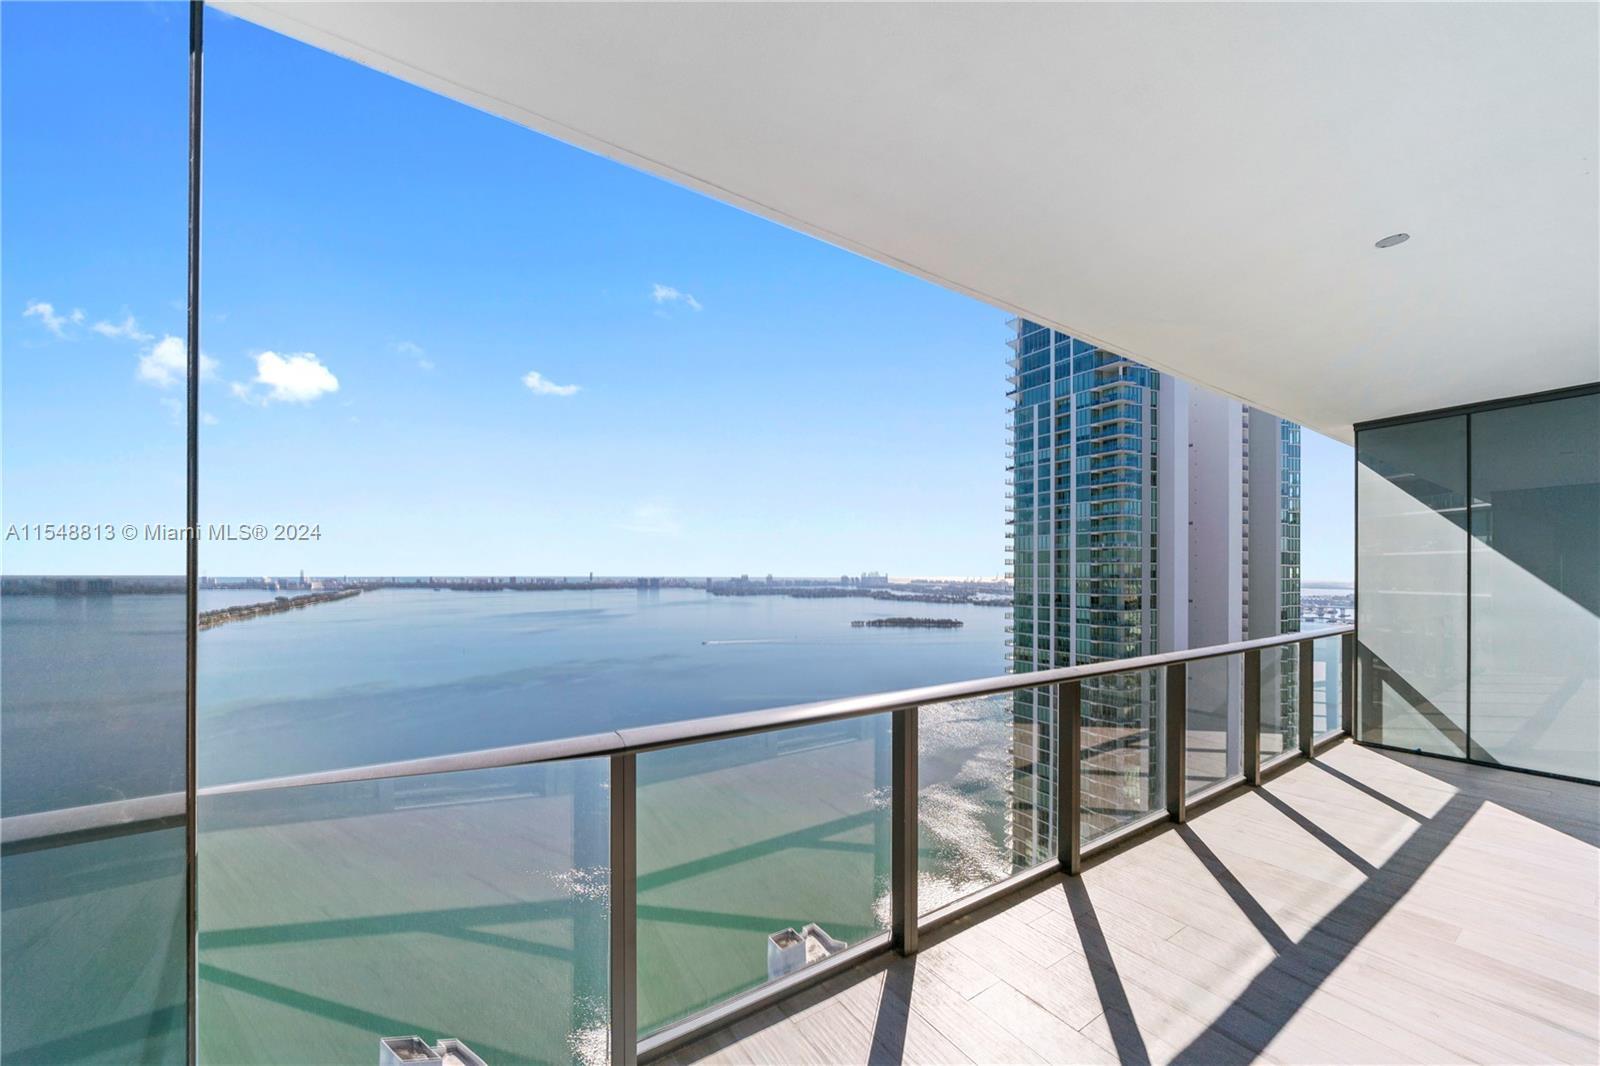 Experience endless panoramic bay and ocean views from the oversized balcony  of this 1 bedroom, 2.5 